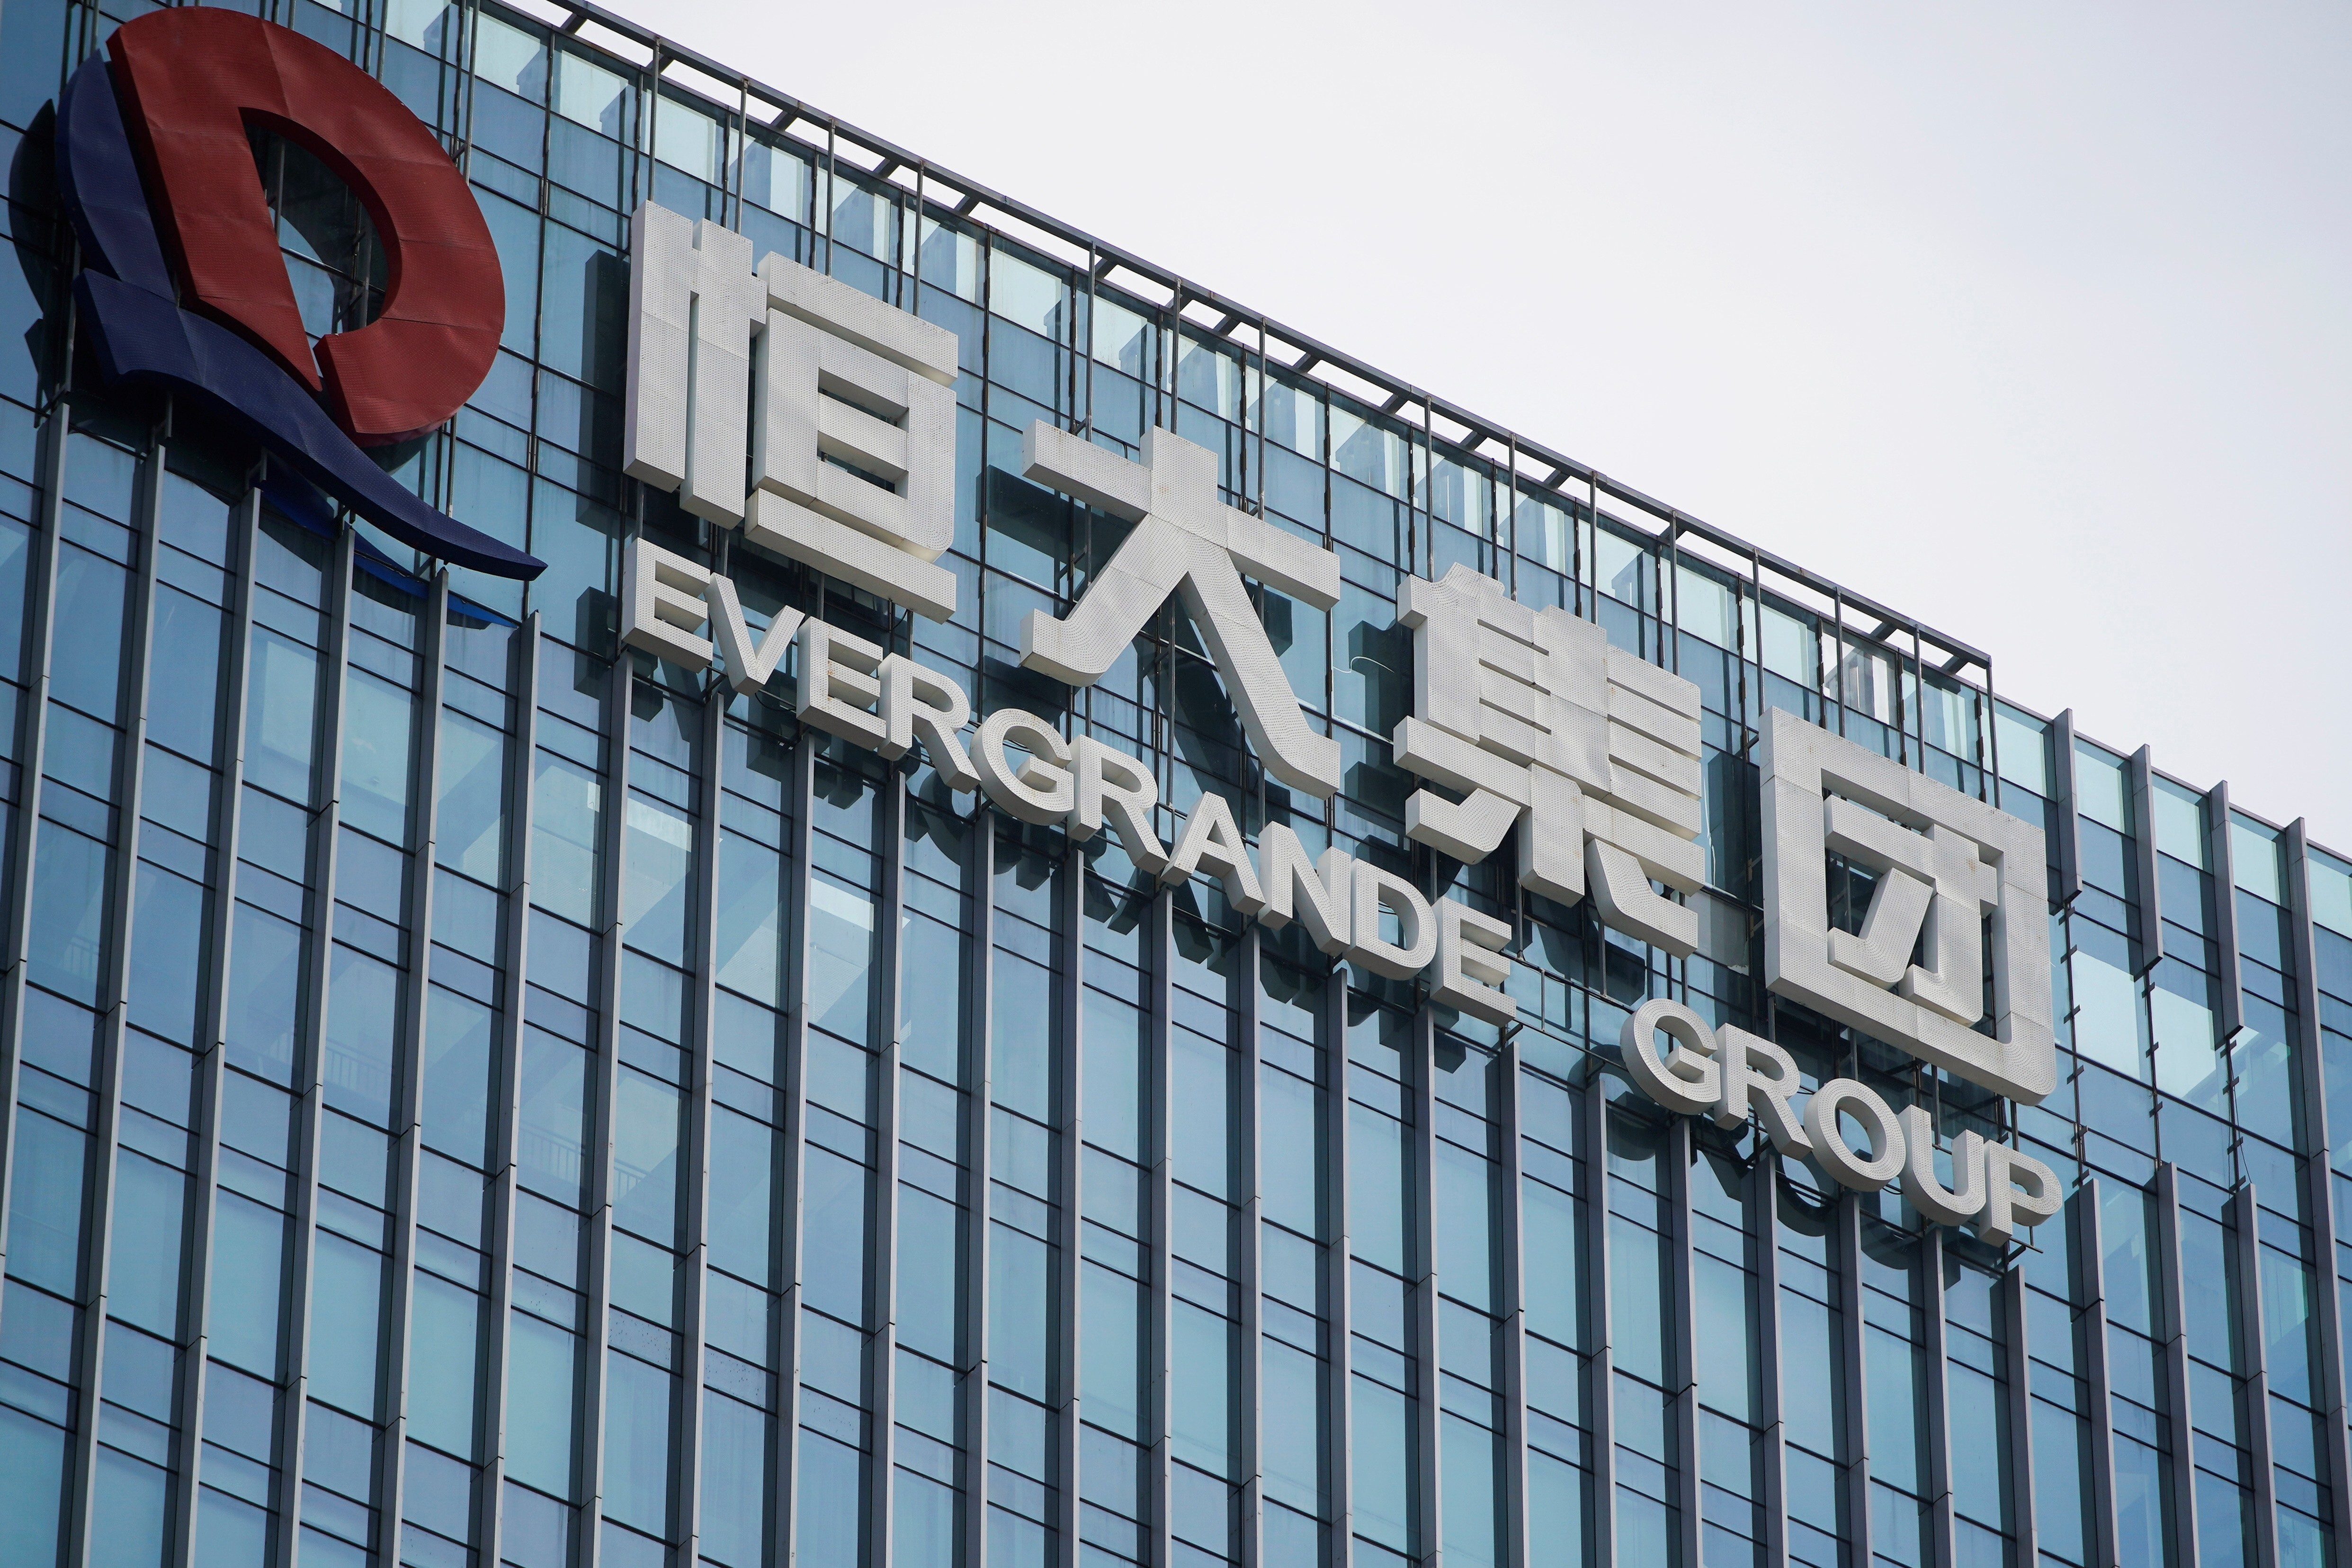 The headquarters of China Evergrande Group in Shenzhen, Guangdong province. Photo: Reuters